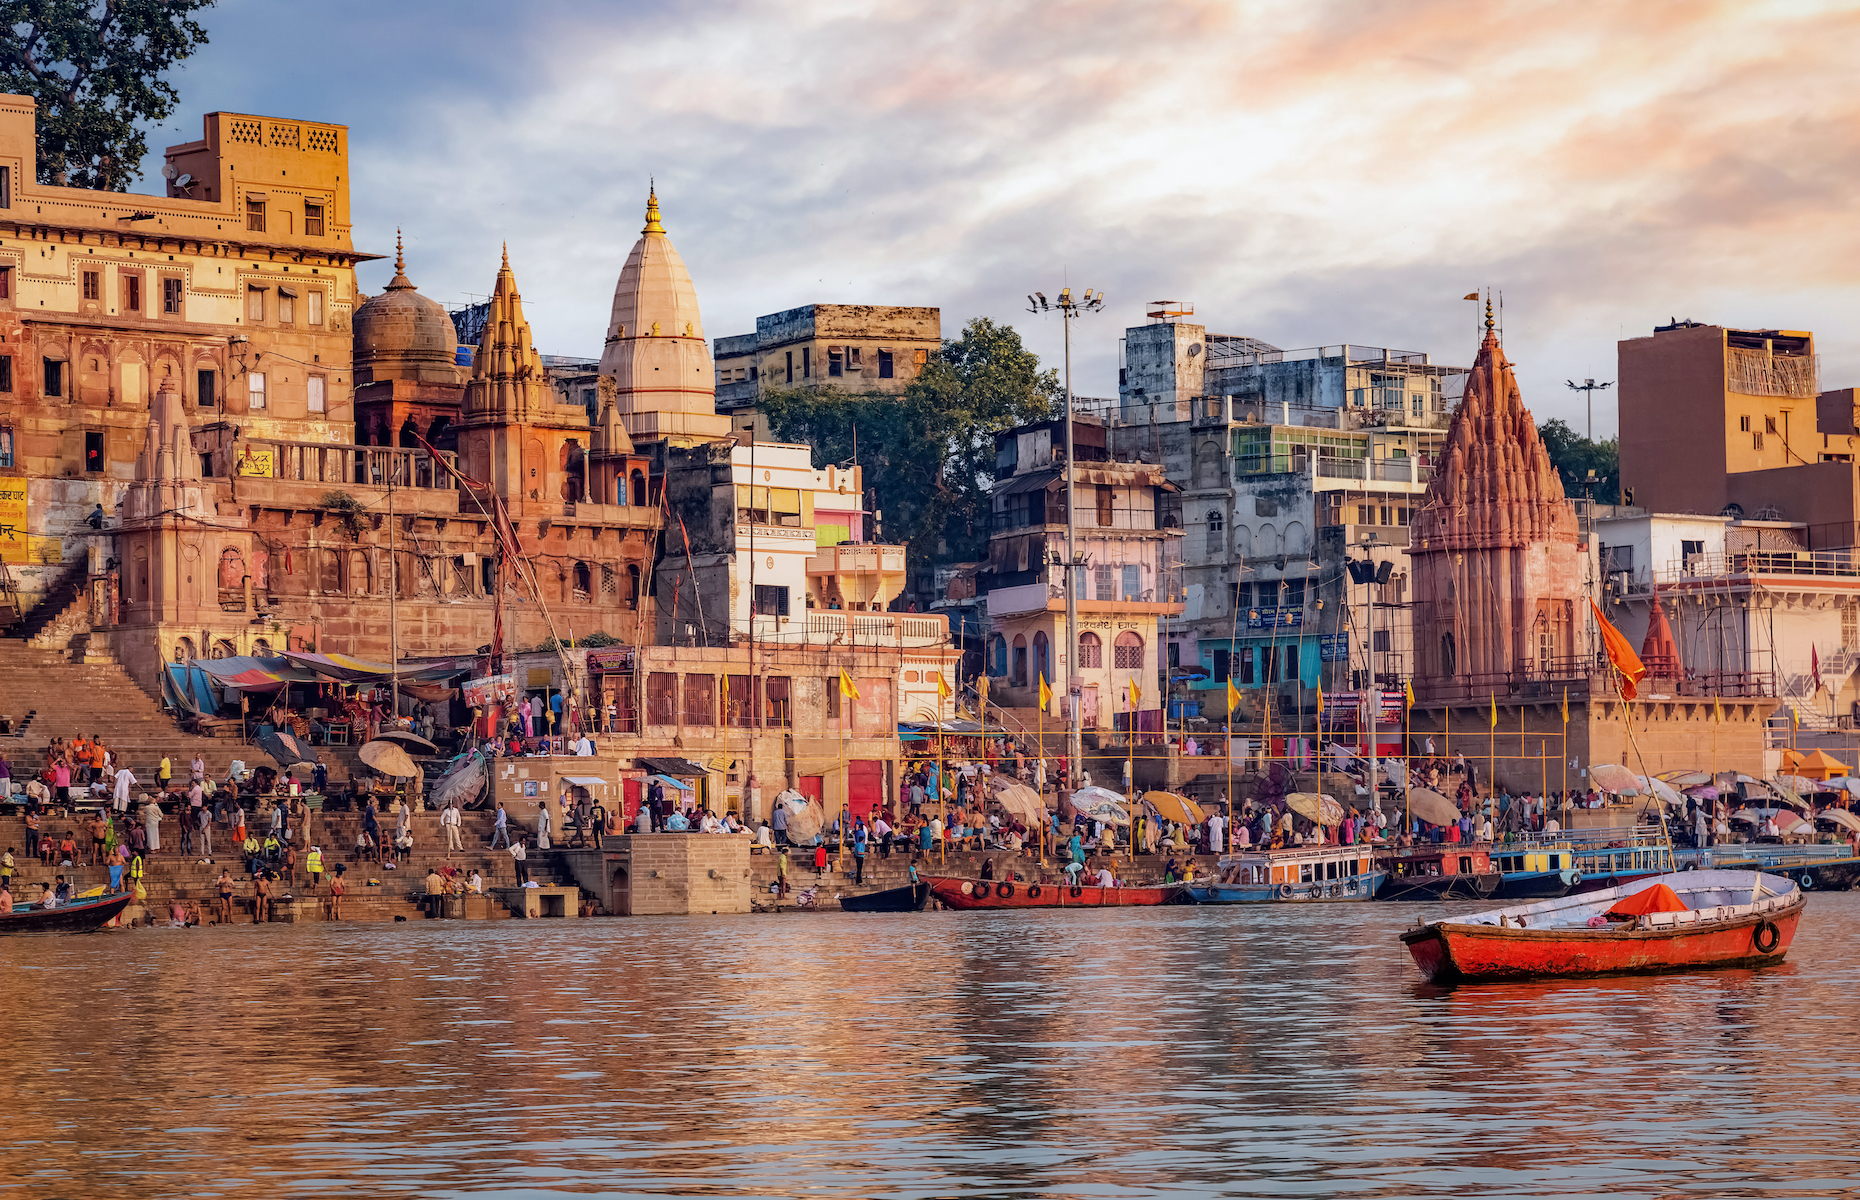 <p>The <a href="https://www.britannica.com/place/Varanasi" rel="noreferrer noopener">banks of the Ganges, in Varanasi (Benares)</a>, have been the most important Hindu pilgrimage site for millennia. Millions of visitors come every year to the city dedicated to the god Shiva to <a href="https://www.reuters.com/article/idUSB849903" rel="noreferrer noopener">bathe in the waters of the sacred river or deposit the ashes of their dead</a>. Sadly, this spiritual centre has fallen victim to its own success and suffers from pollution due to the number of pilgrims and cremations.</p>